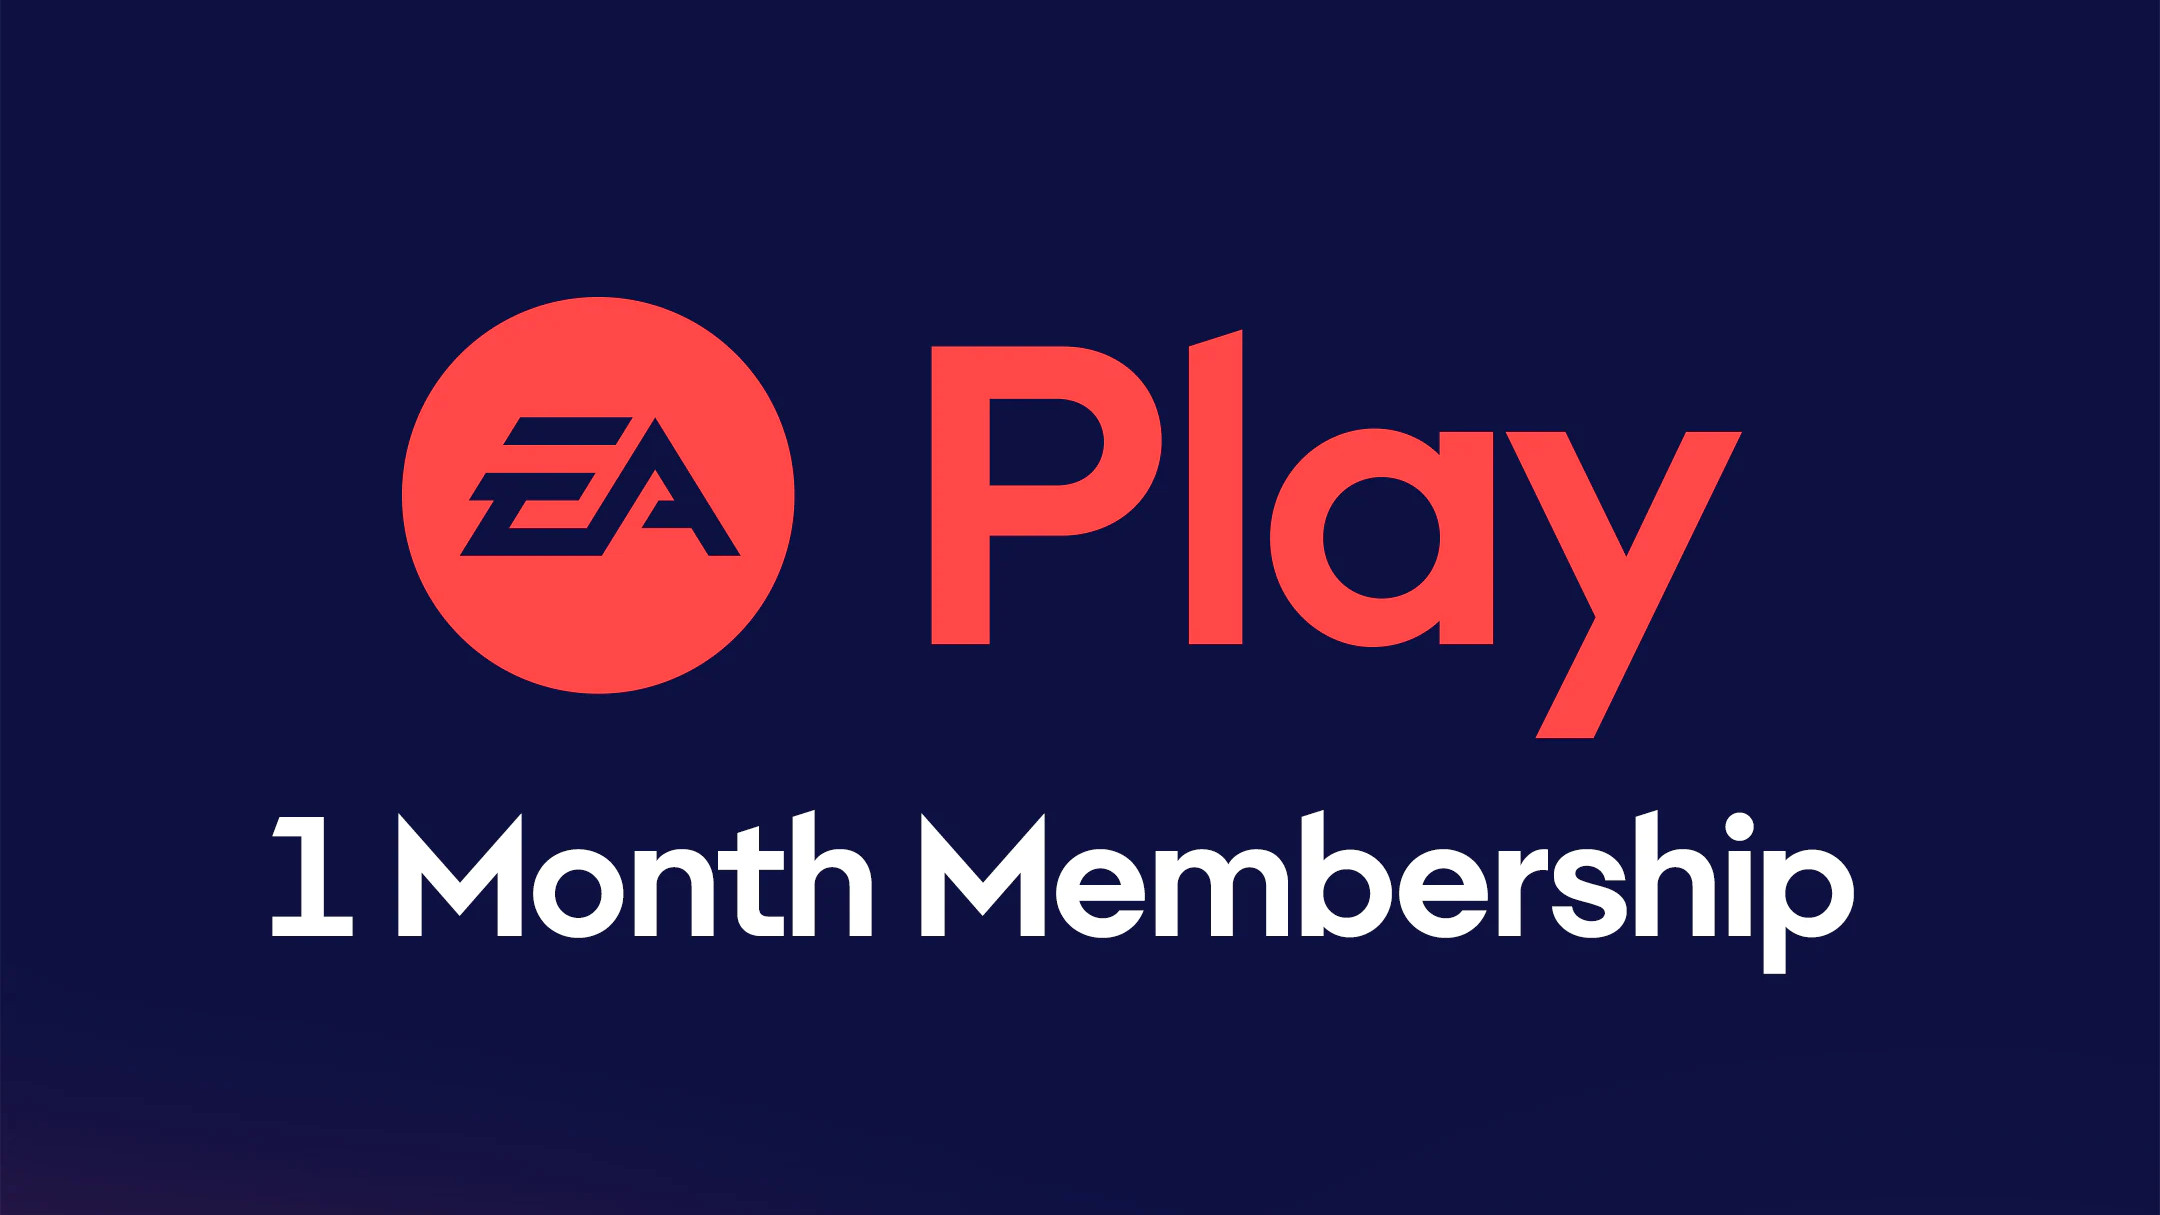 EA Play - 1 Month Subscription Key 20.31$